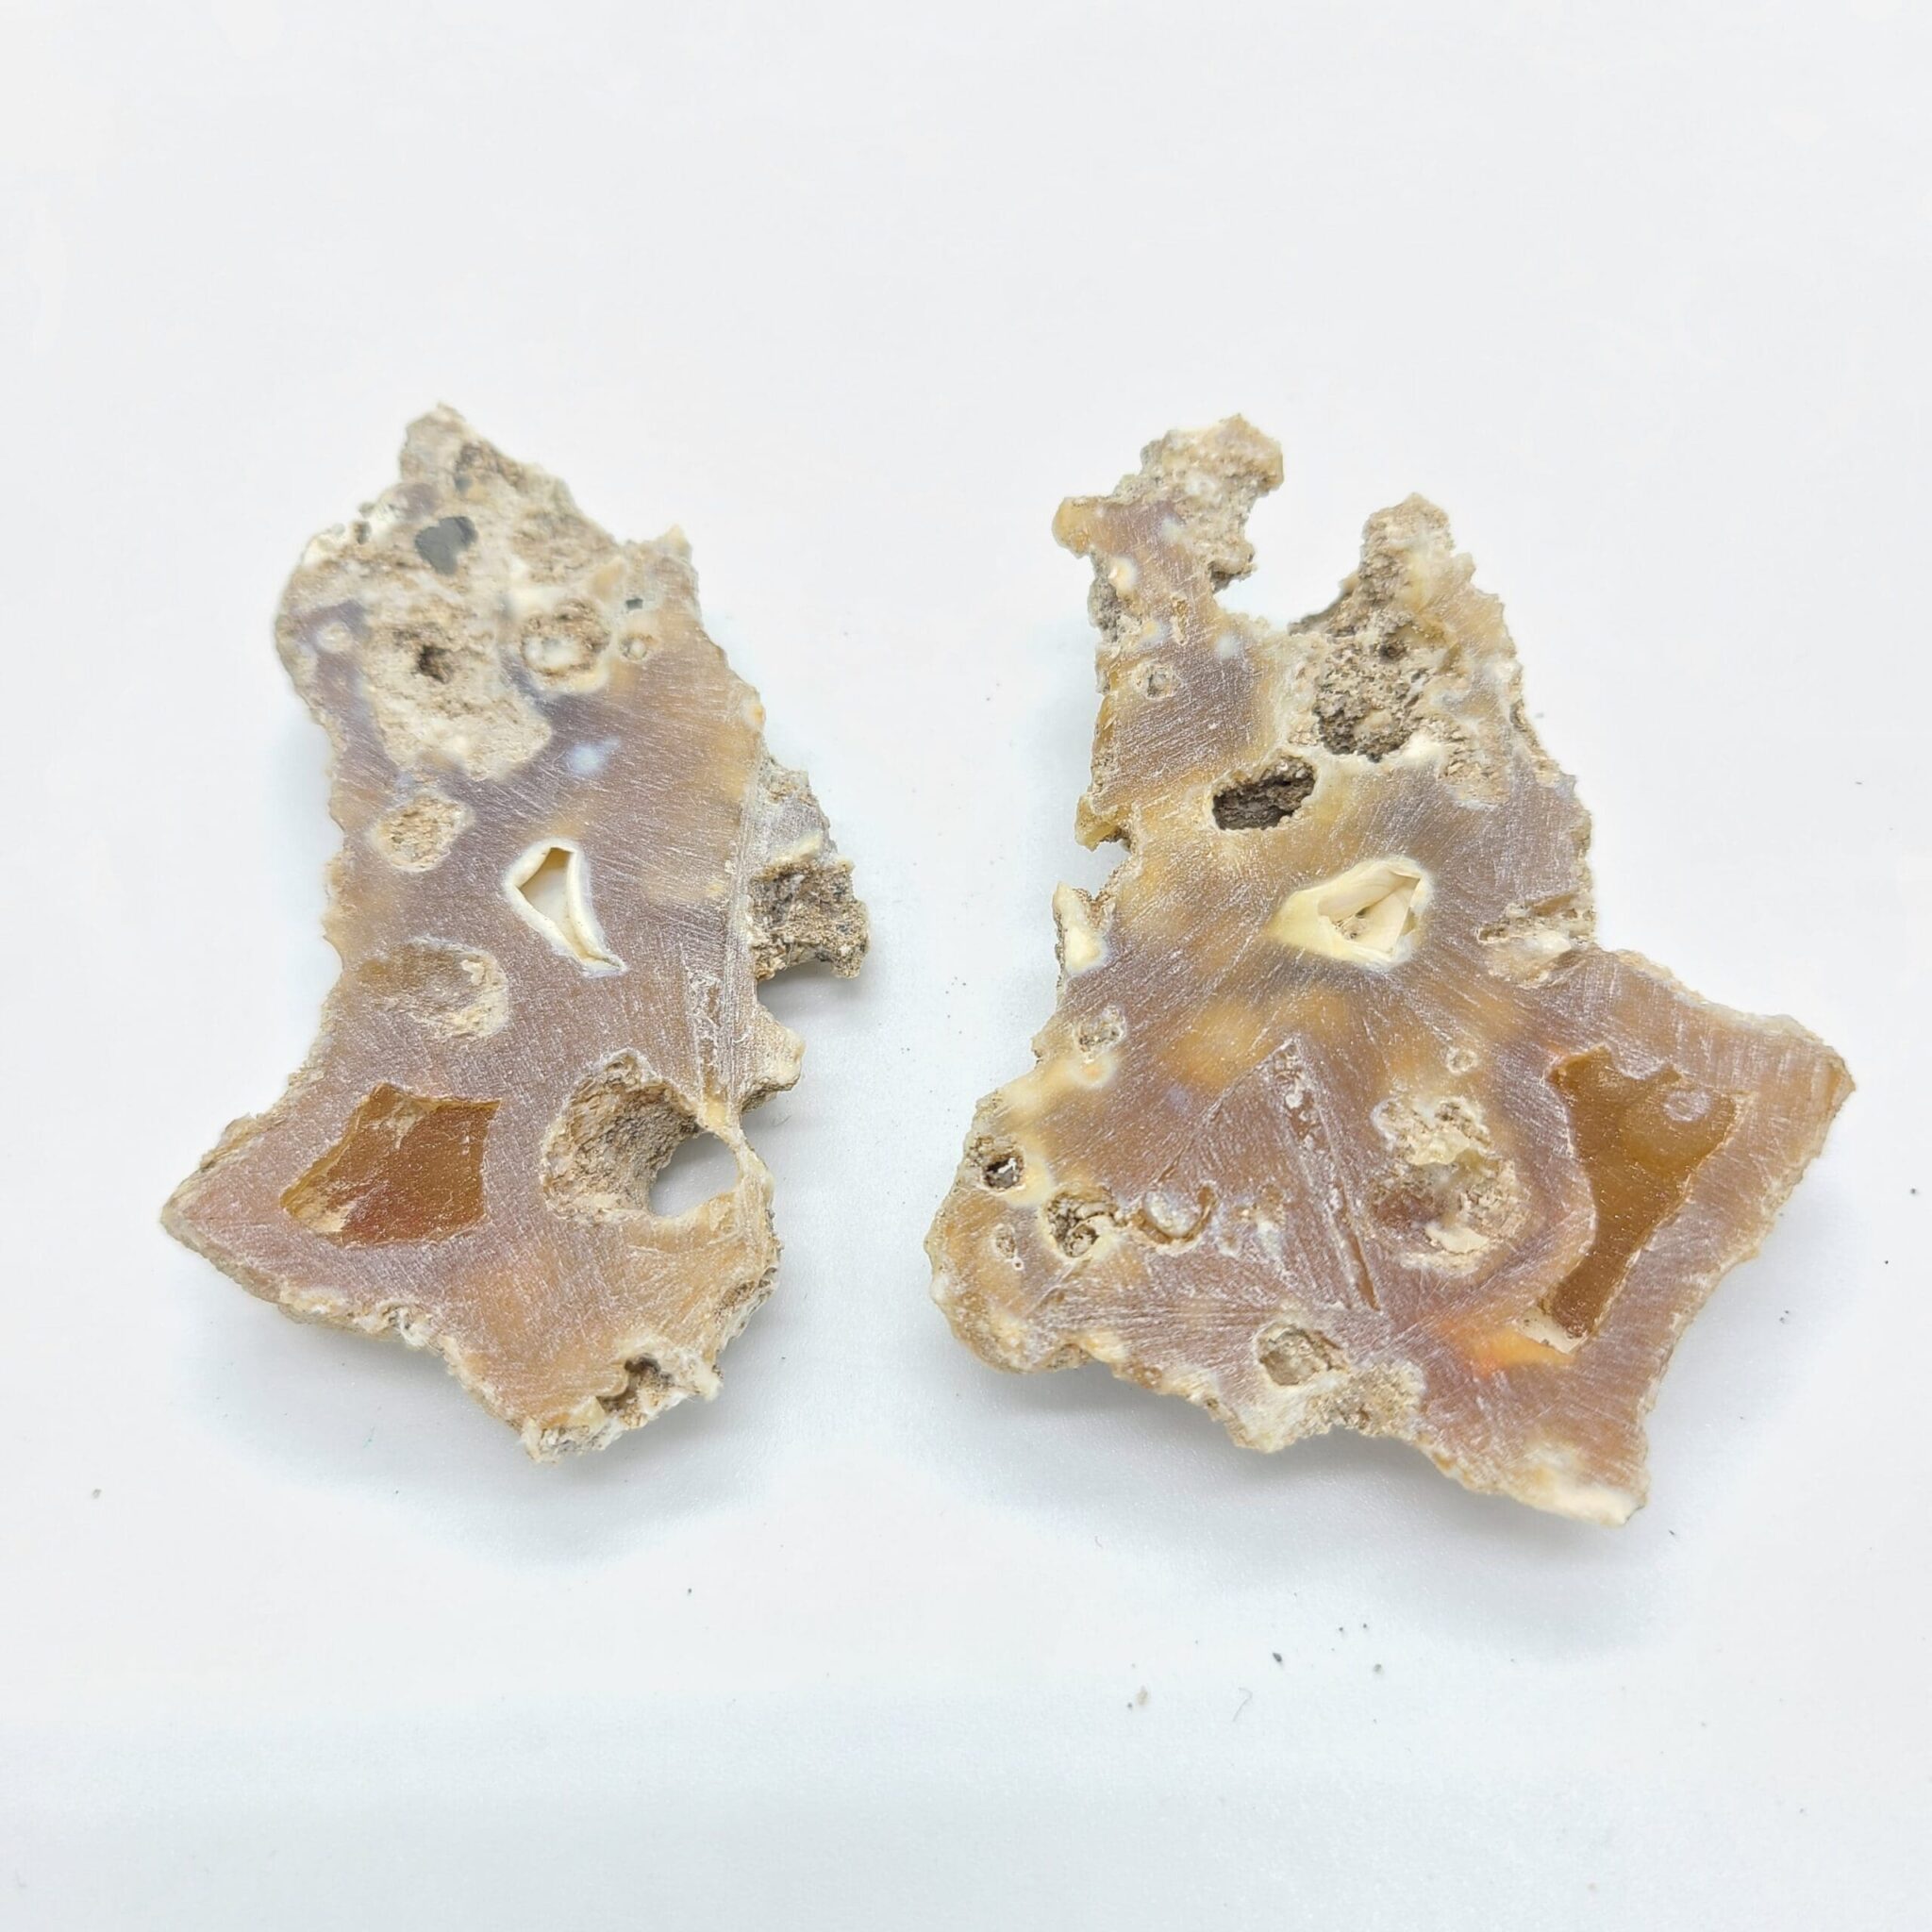 Agatized Coral Fossil from Florida - Pair 2 - Miami Mining Co | Gem Mining  in South Florida